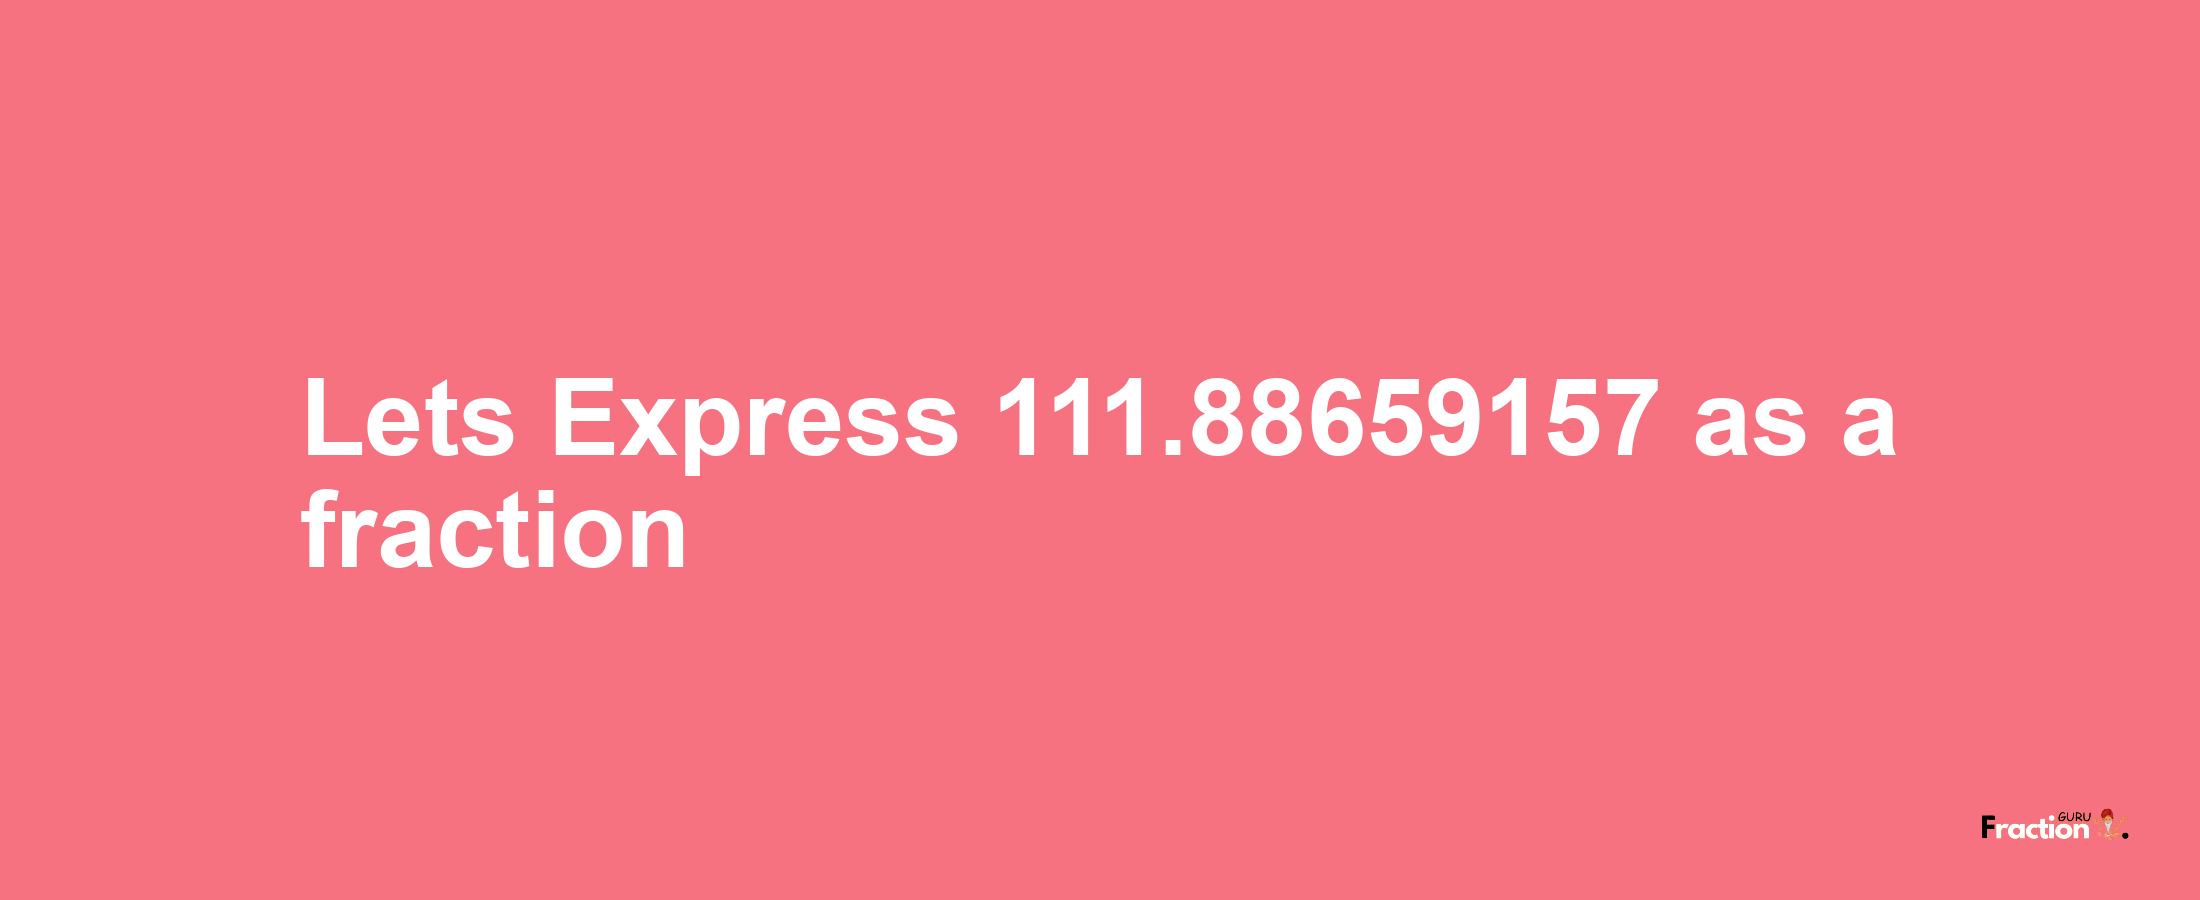 Lets Express 111.88659157 as afraction